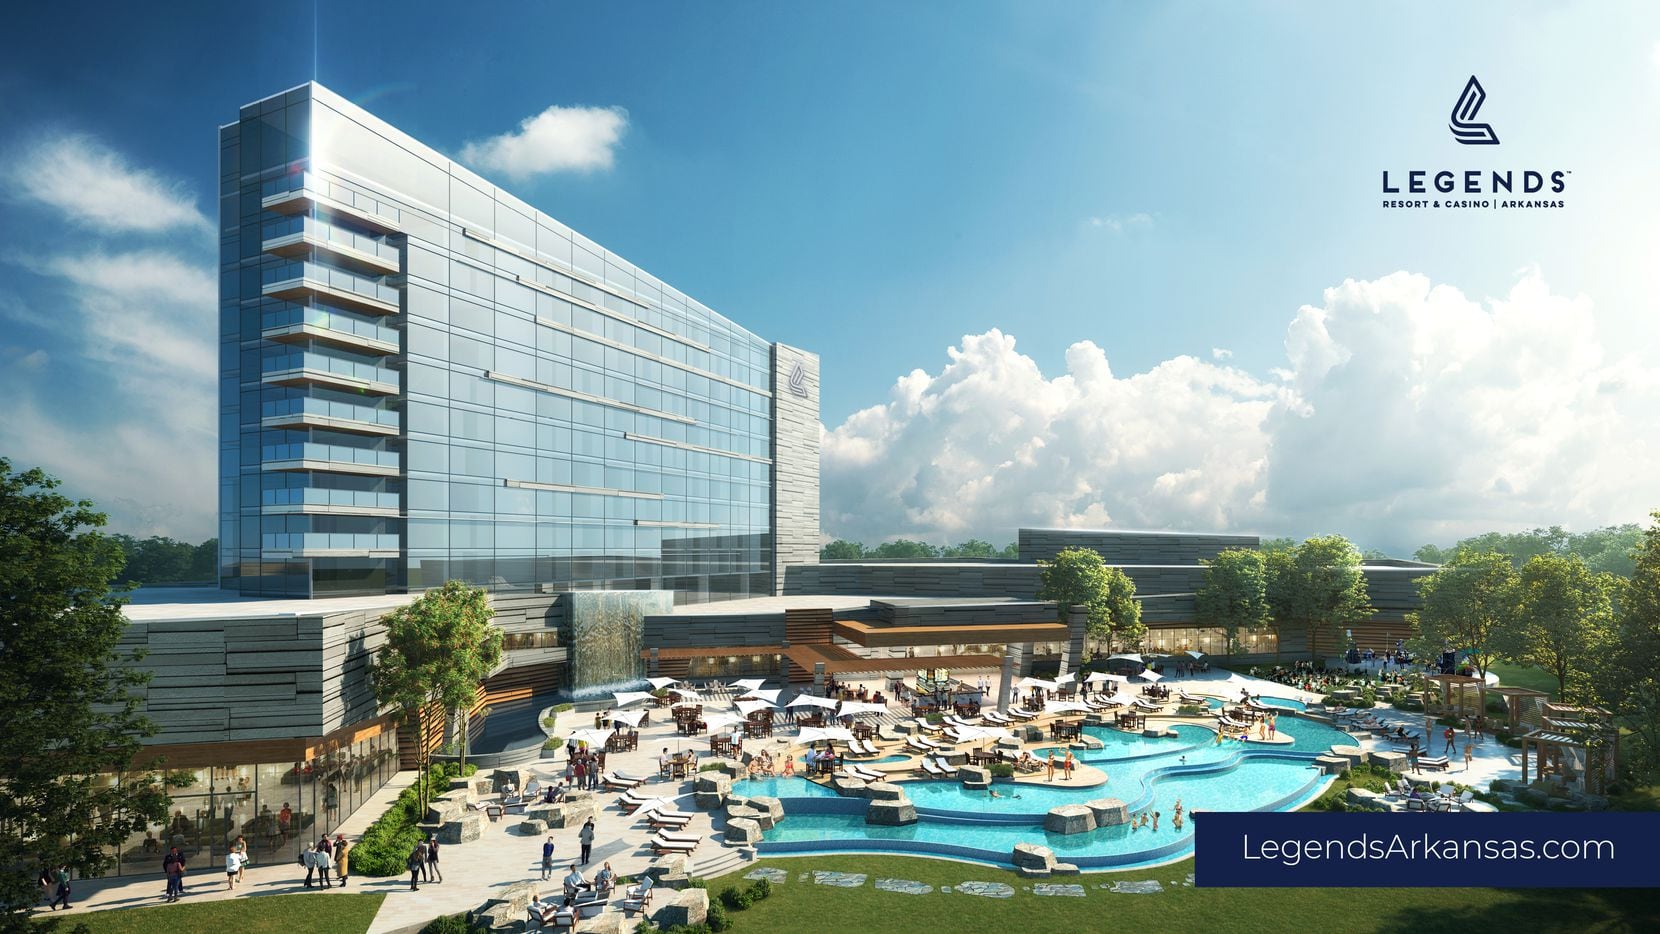 The Legends Resort & Casino Arkansas will feature a 200-room luxury hotel and outdoor water...